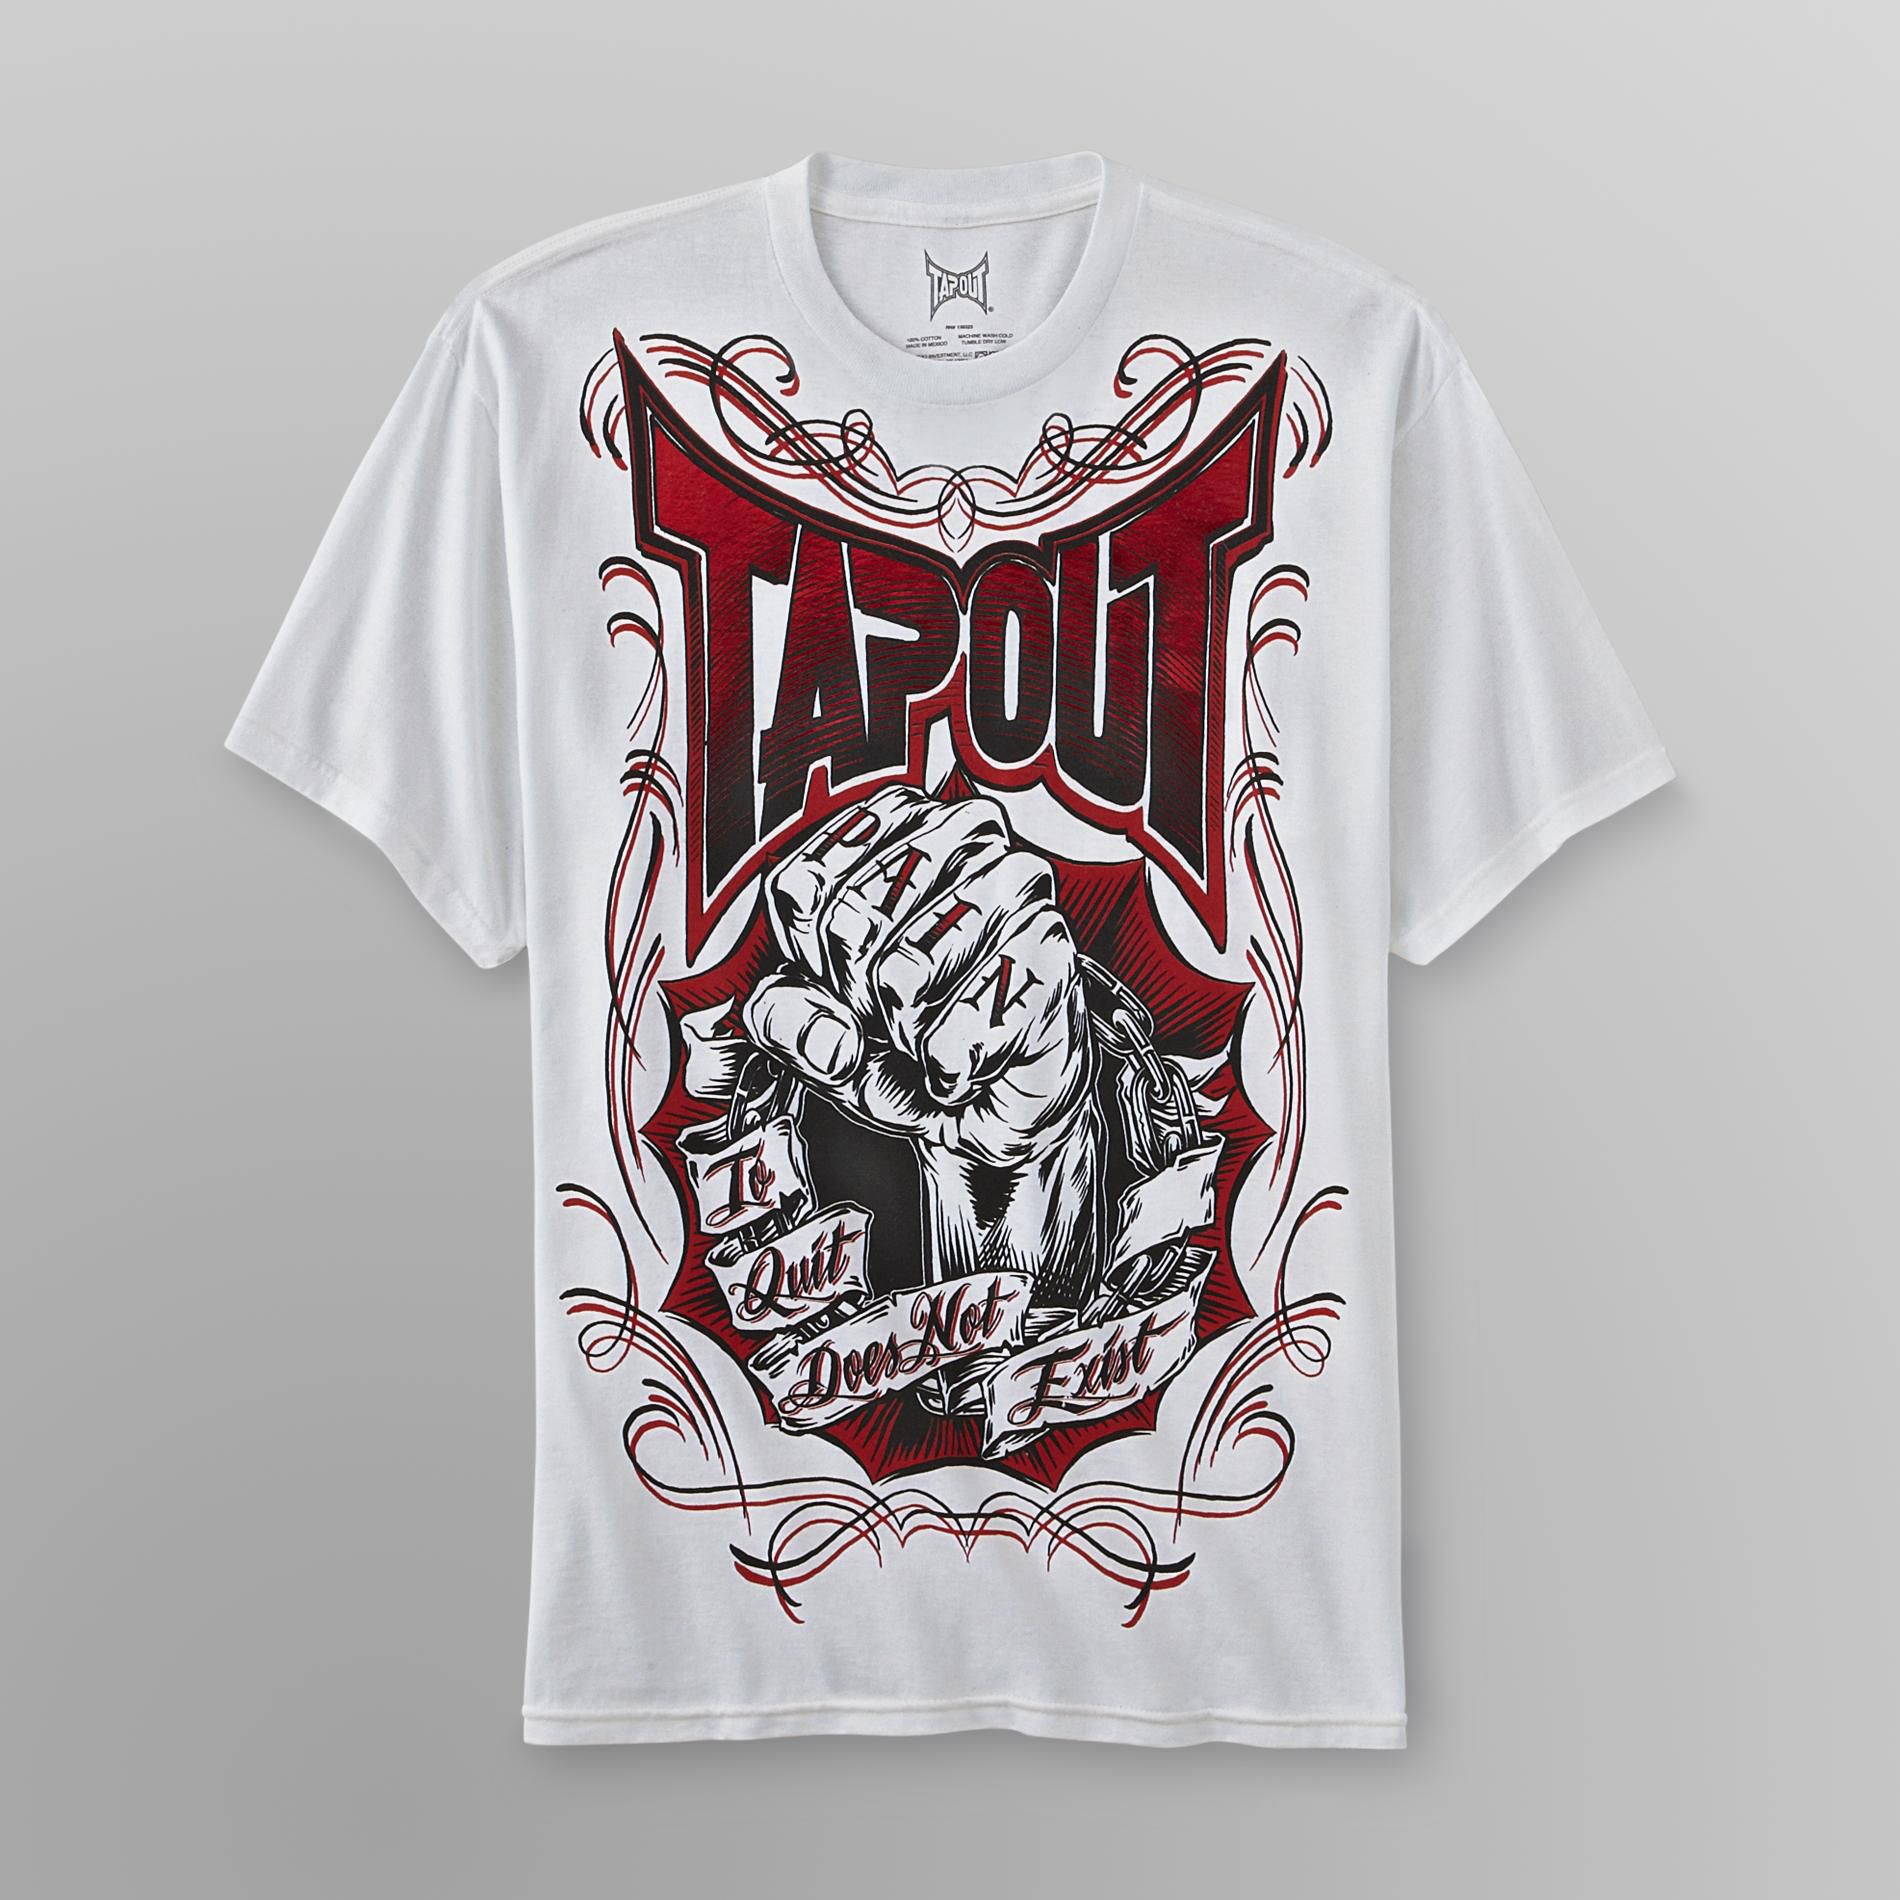 TapouT Young Men's Graphic T-Shirt